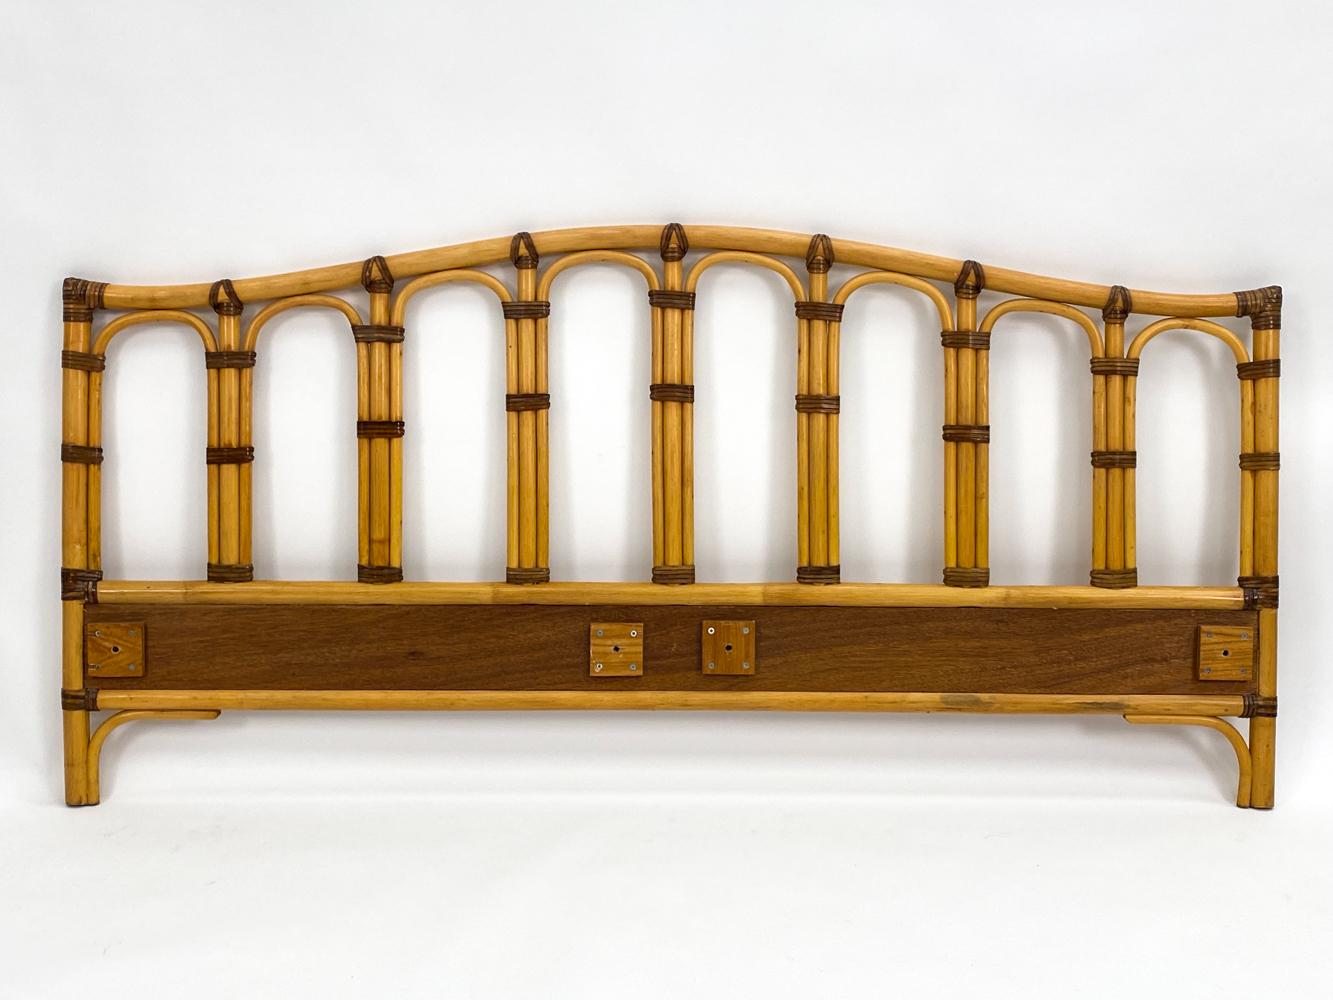 20th Century Bamboo Rattan Full Headboard & Footboard by Dux of Sweden For Sale